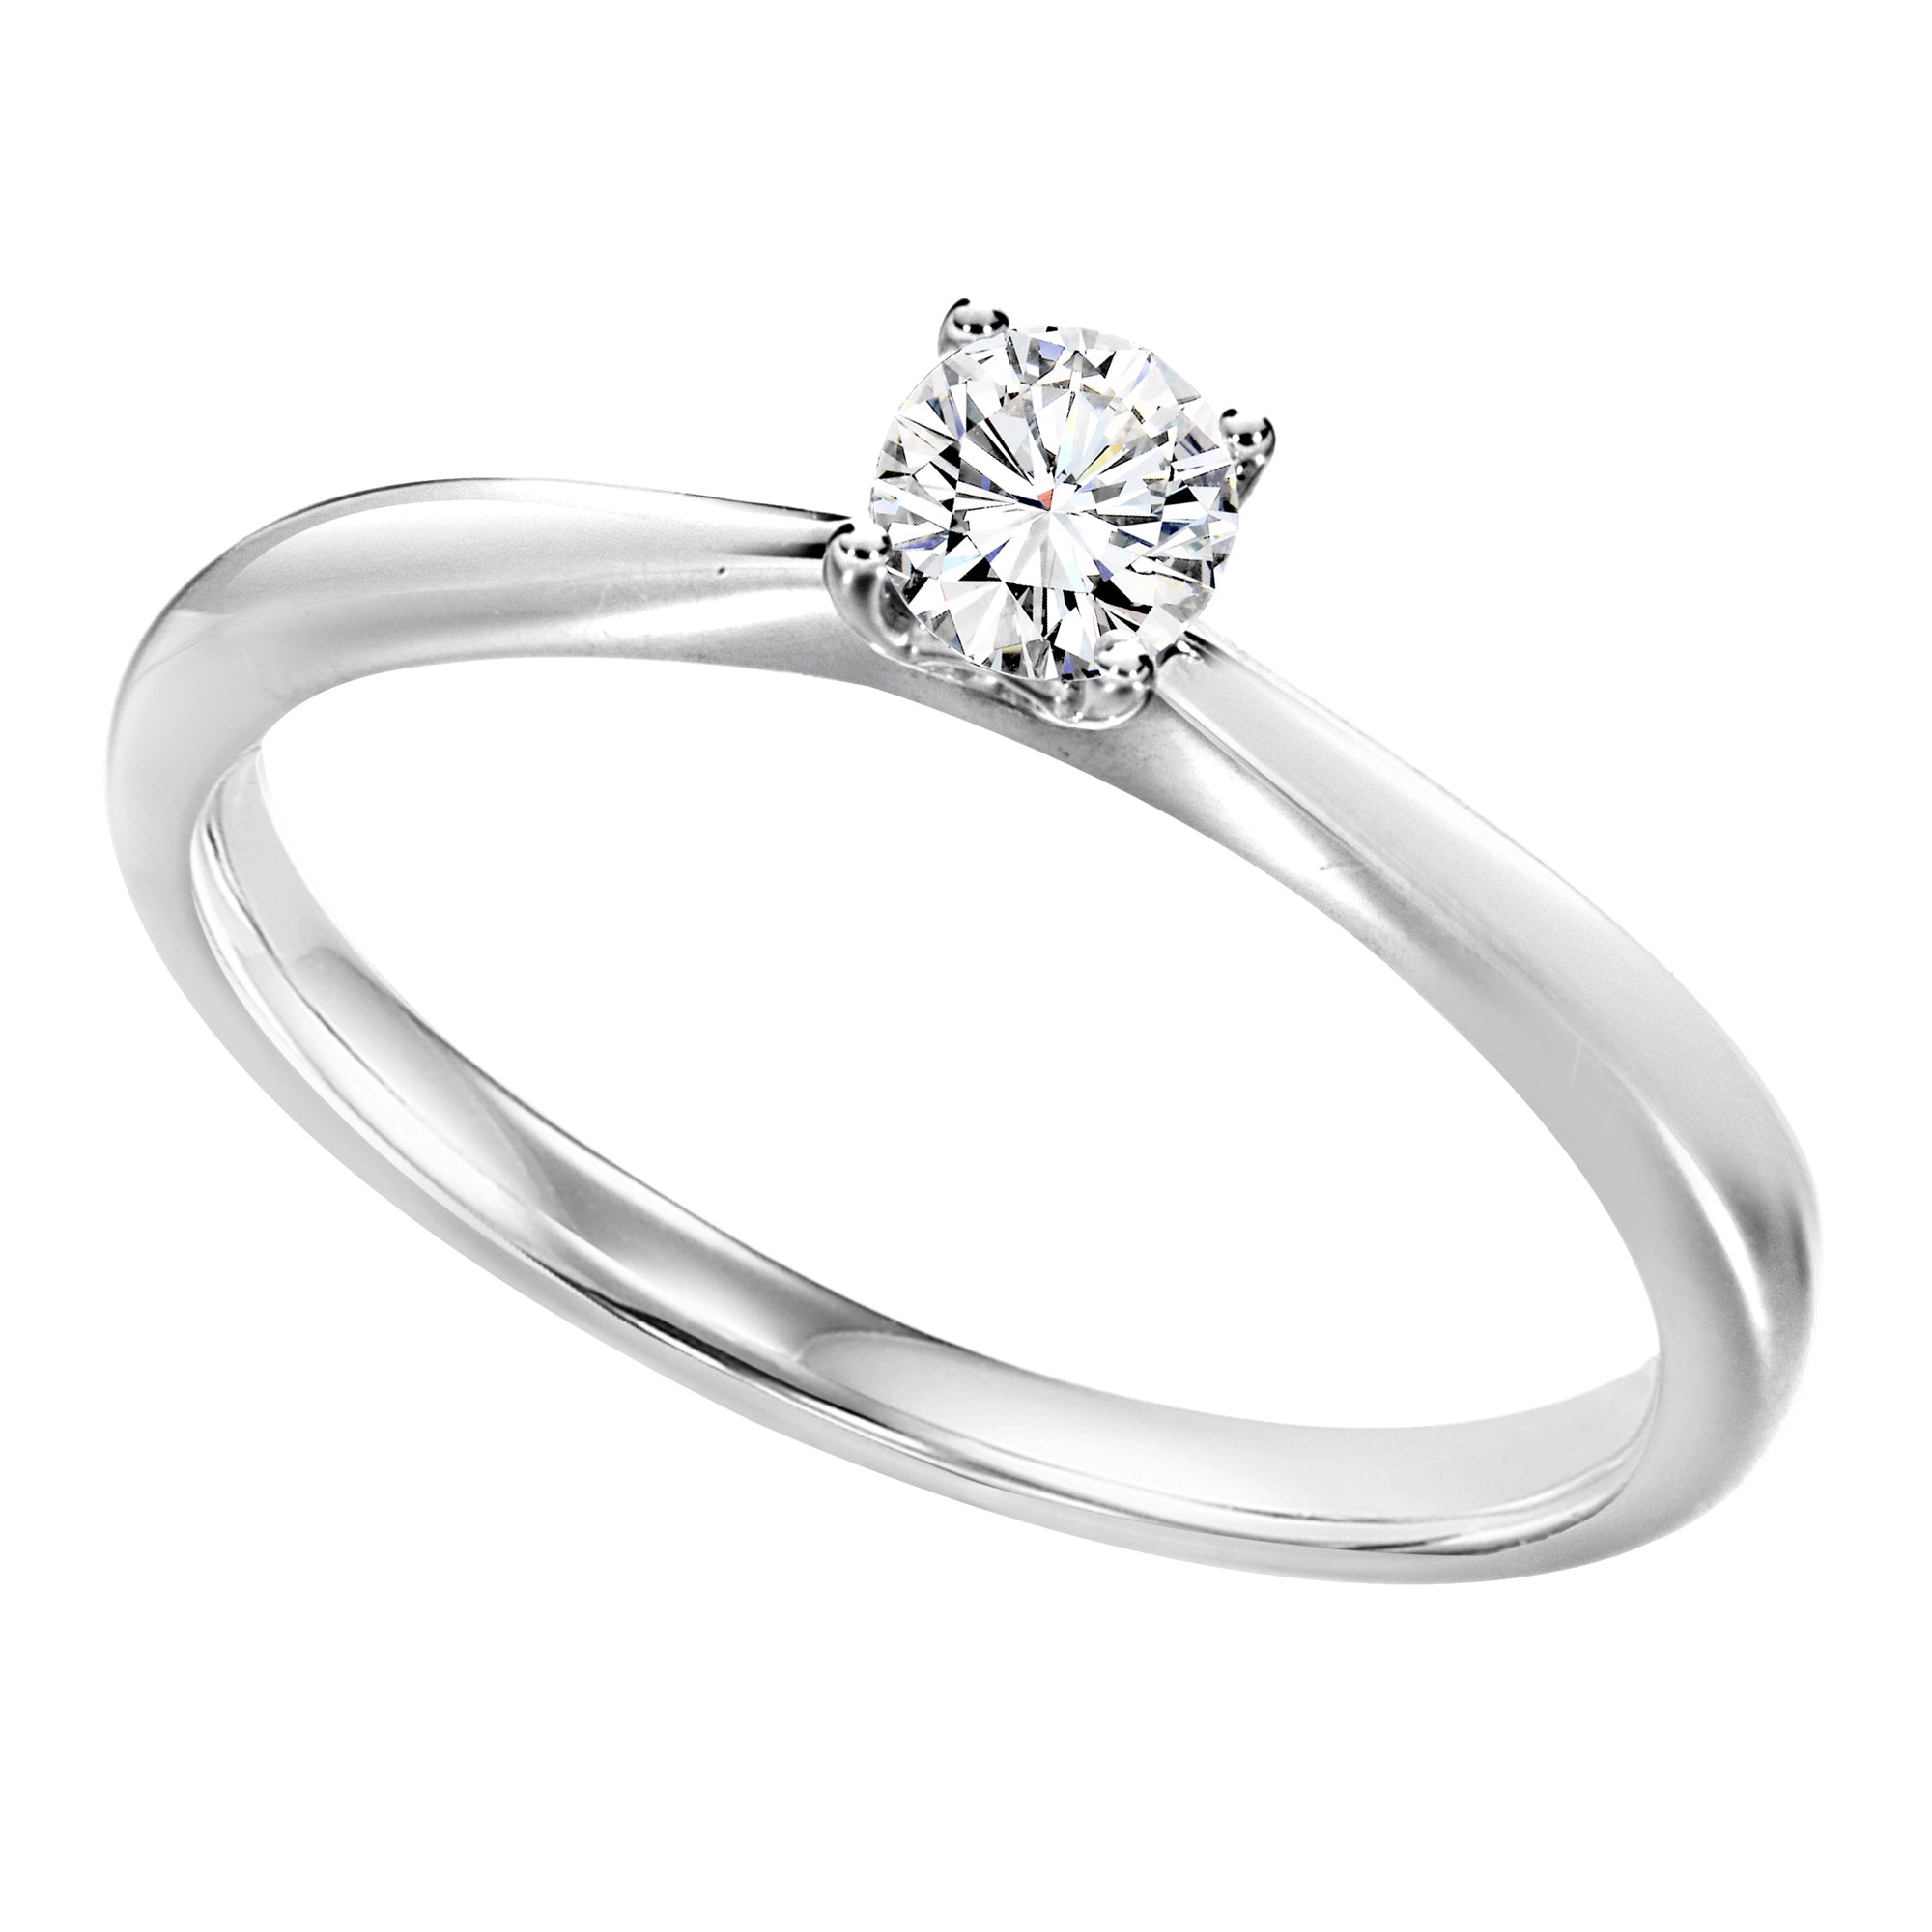 Sterling Silver Cubic Zirconia 1.00ct Ring - AK1018 - Hallmark Jewellers Formby & The Jewellers Bench Widnes